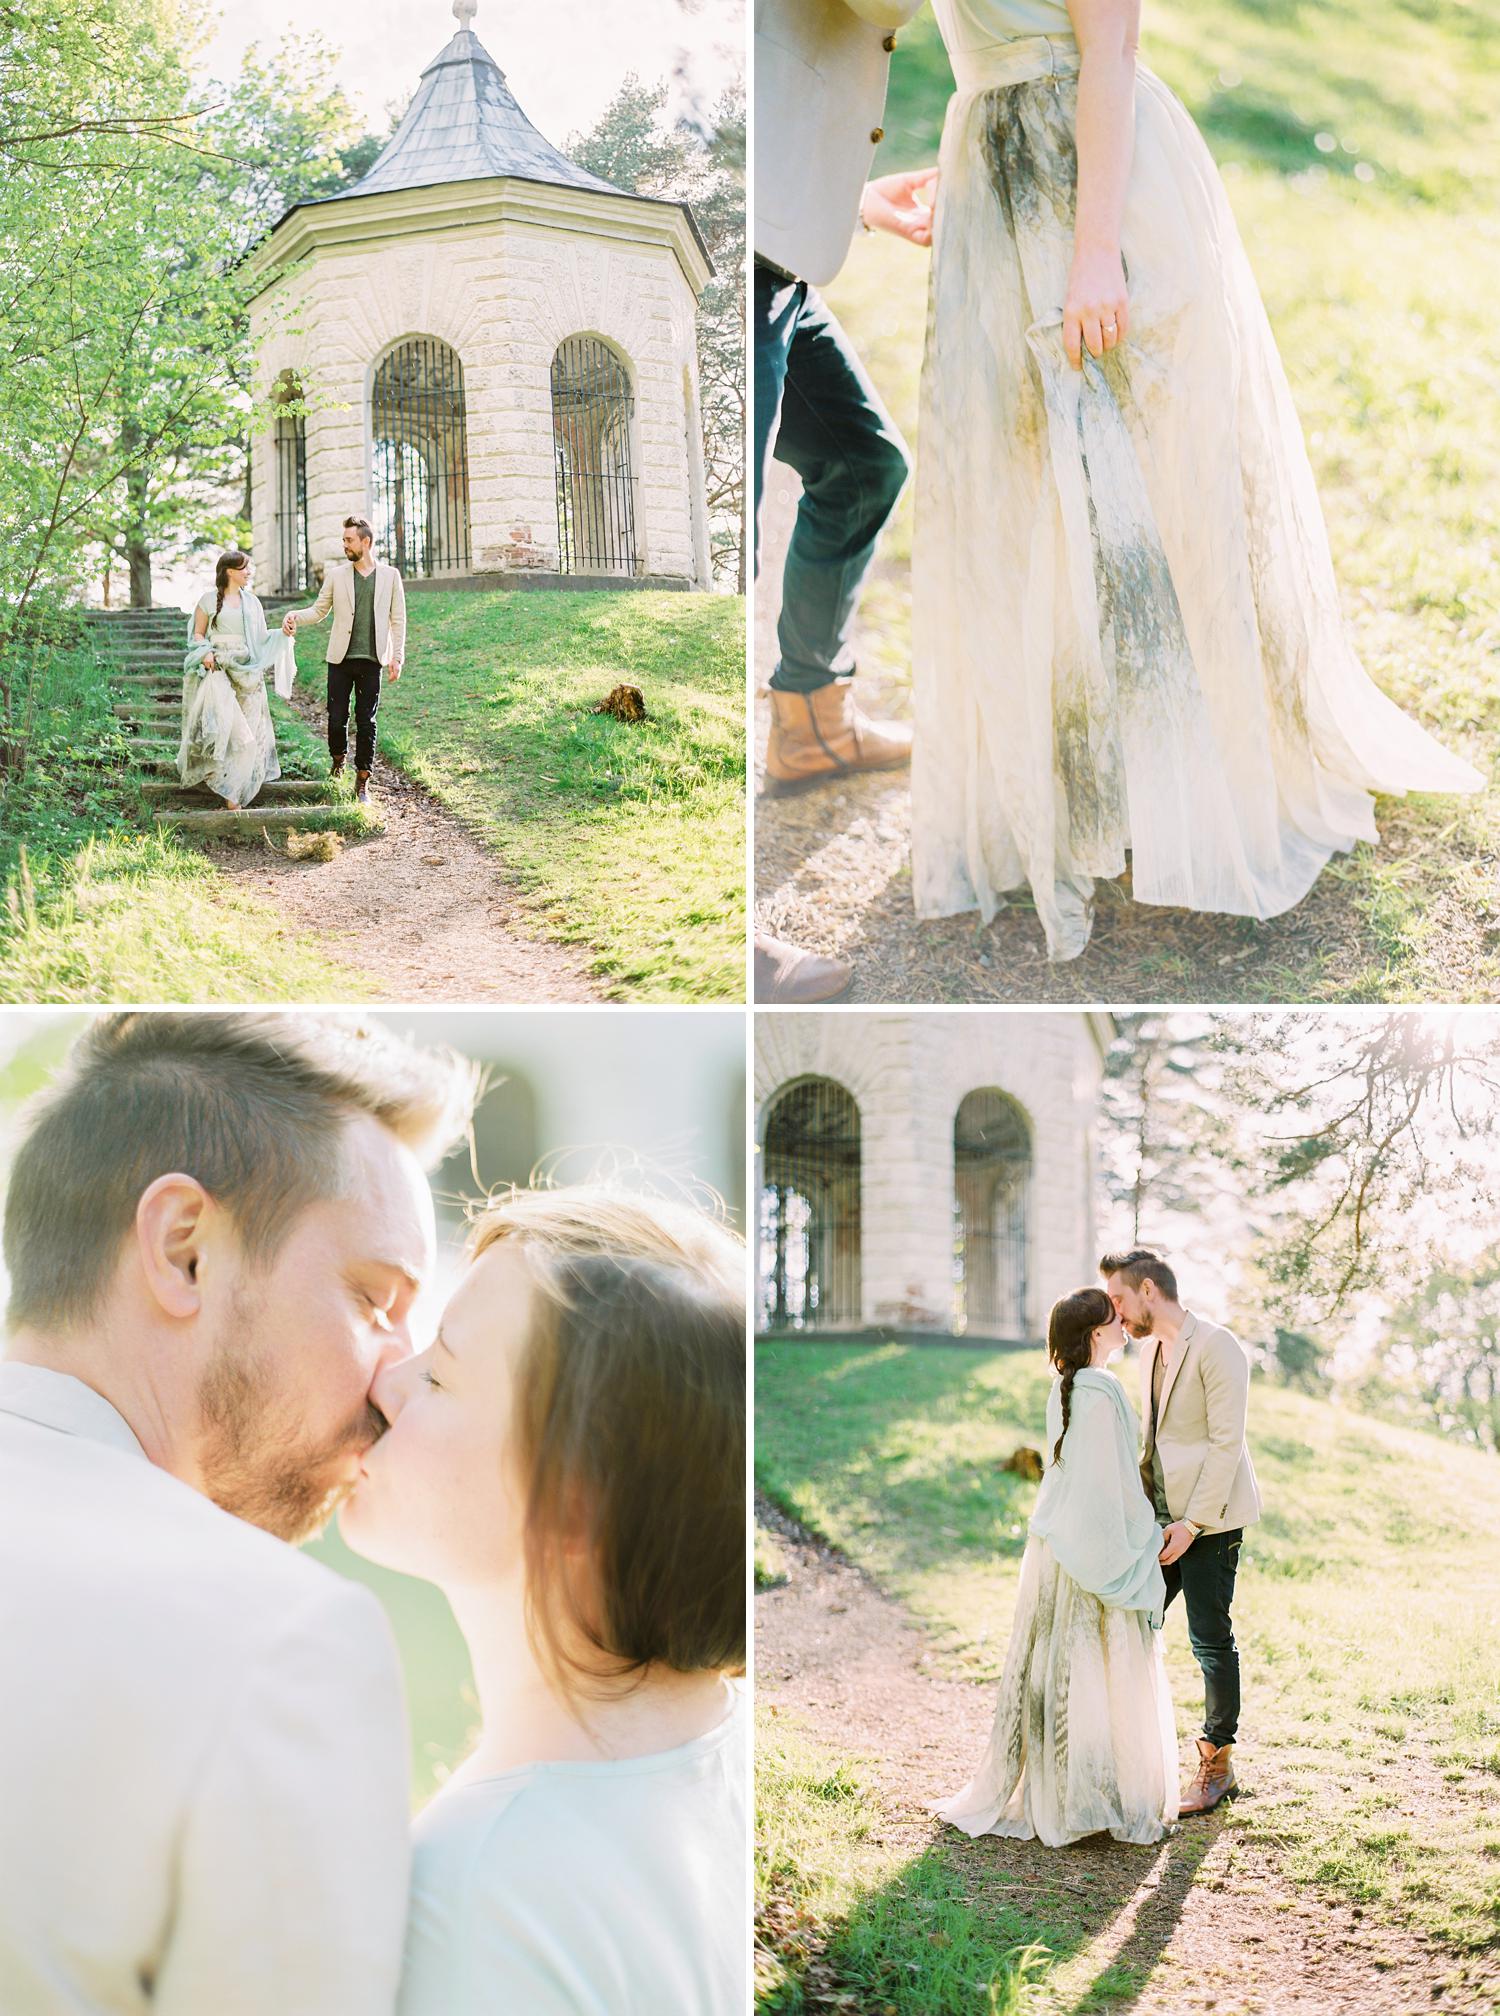 Spring Engagement Session in a Magical Stockholm ForrestSpring Engagement Session in a Magical Stockholm Forrest